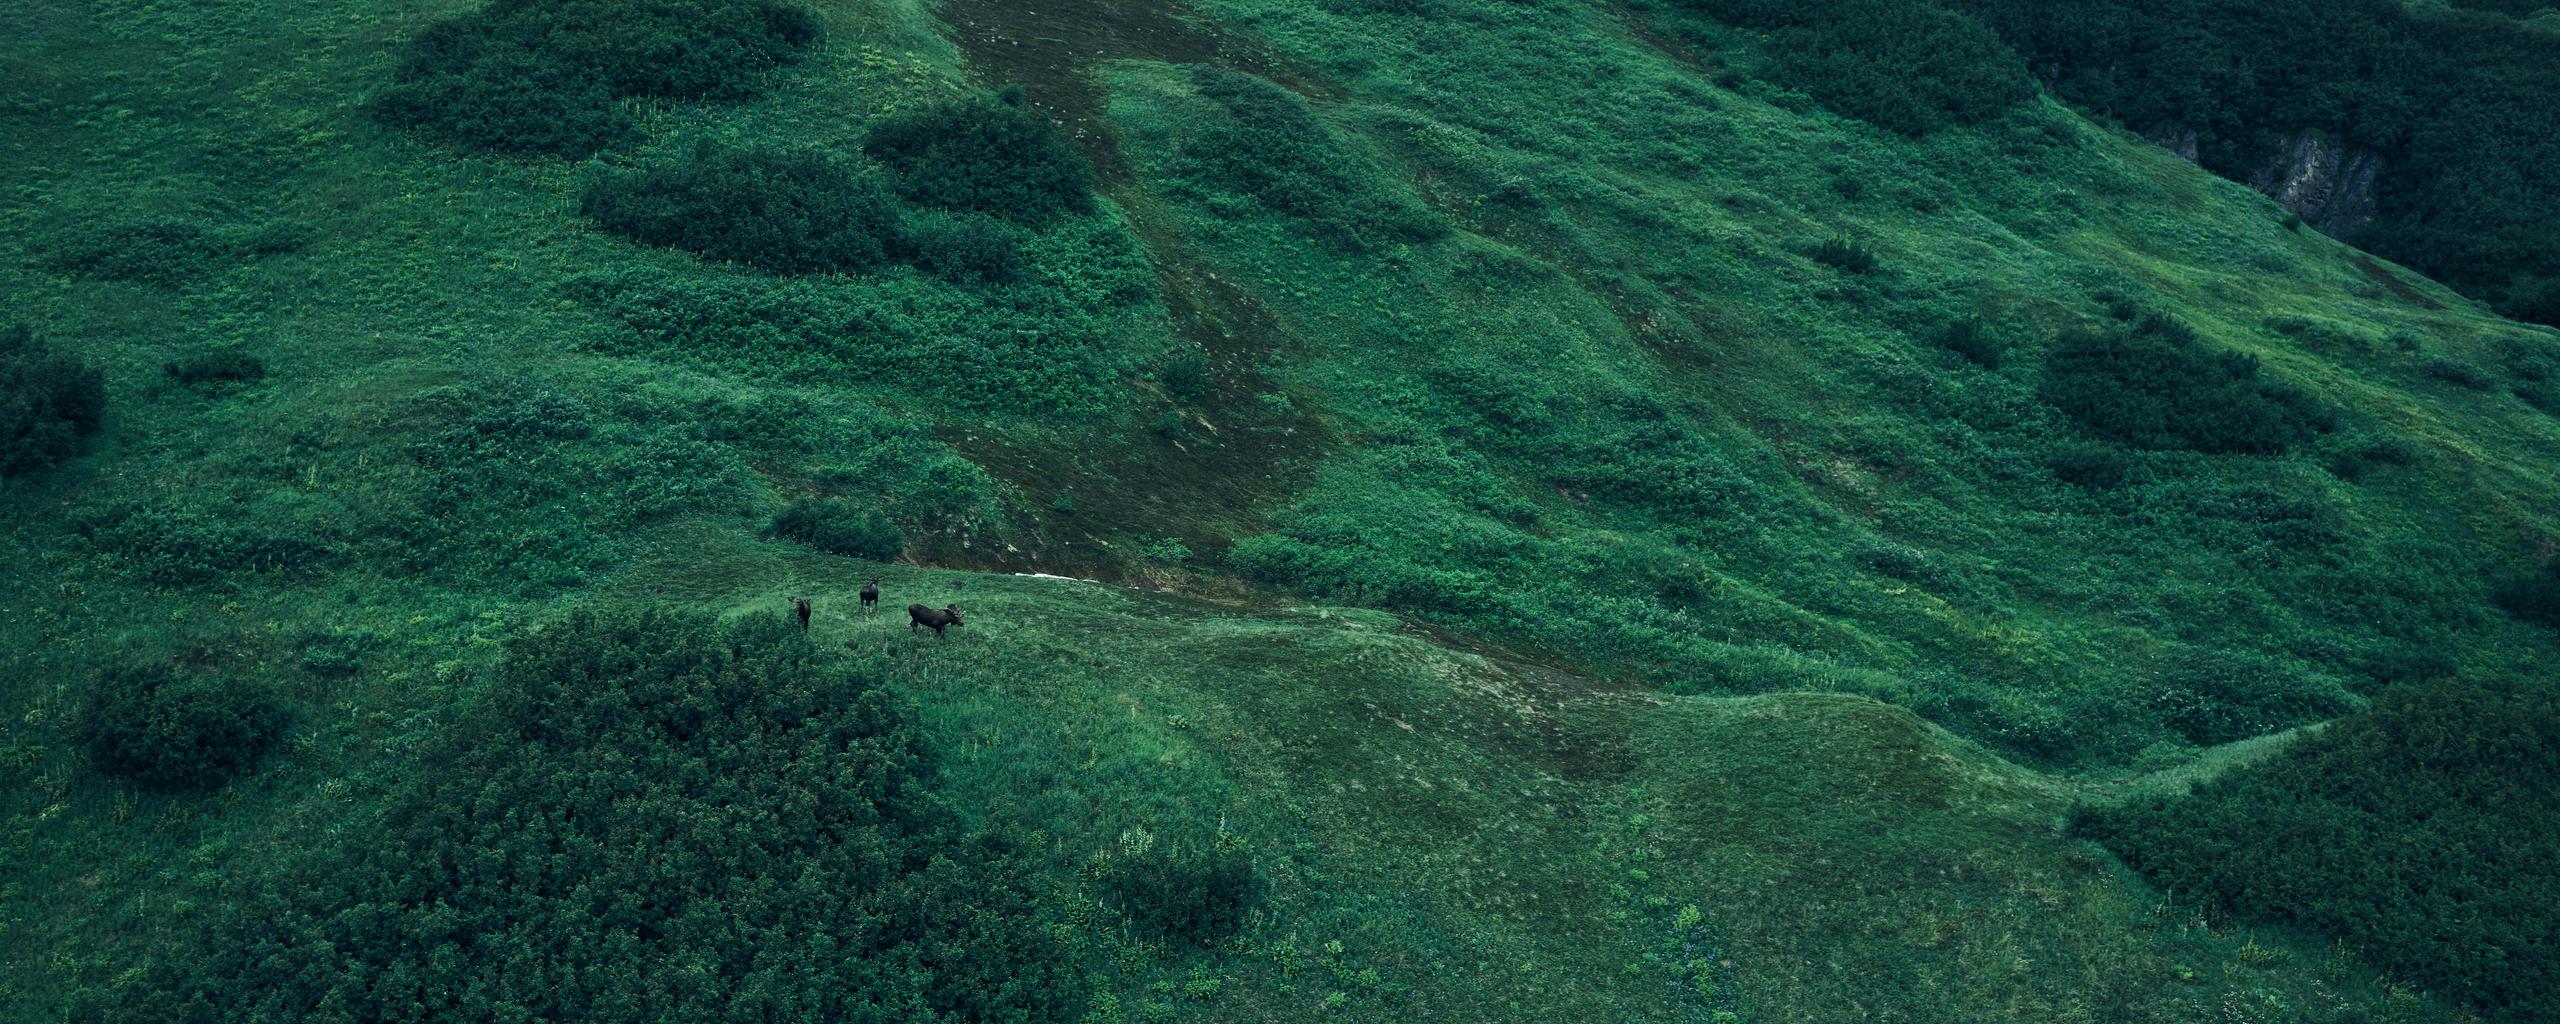 Aerial photo of Alaskan mountains with moose